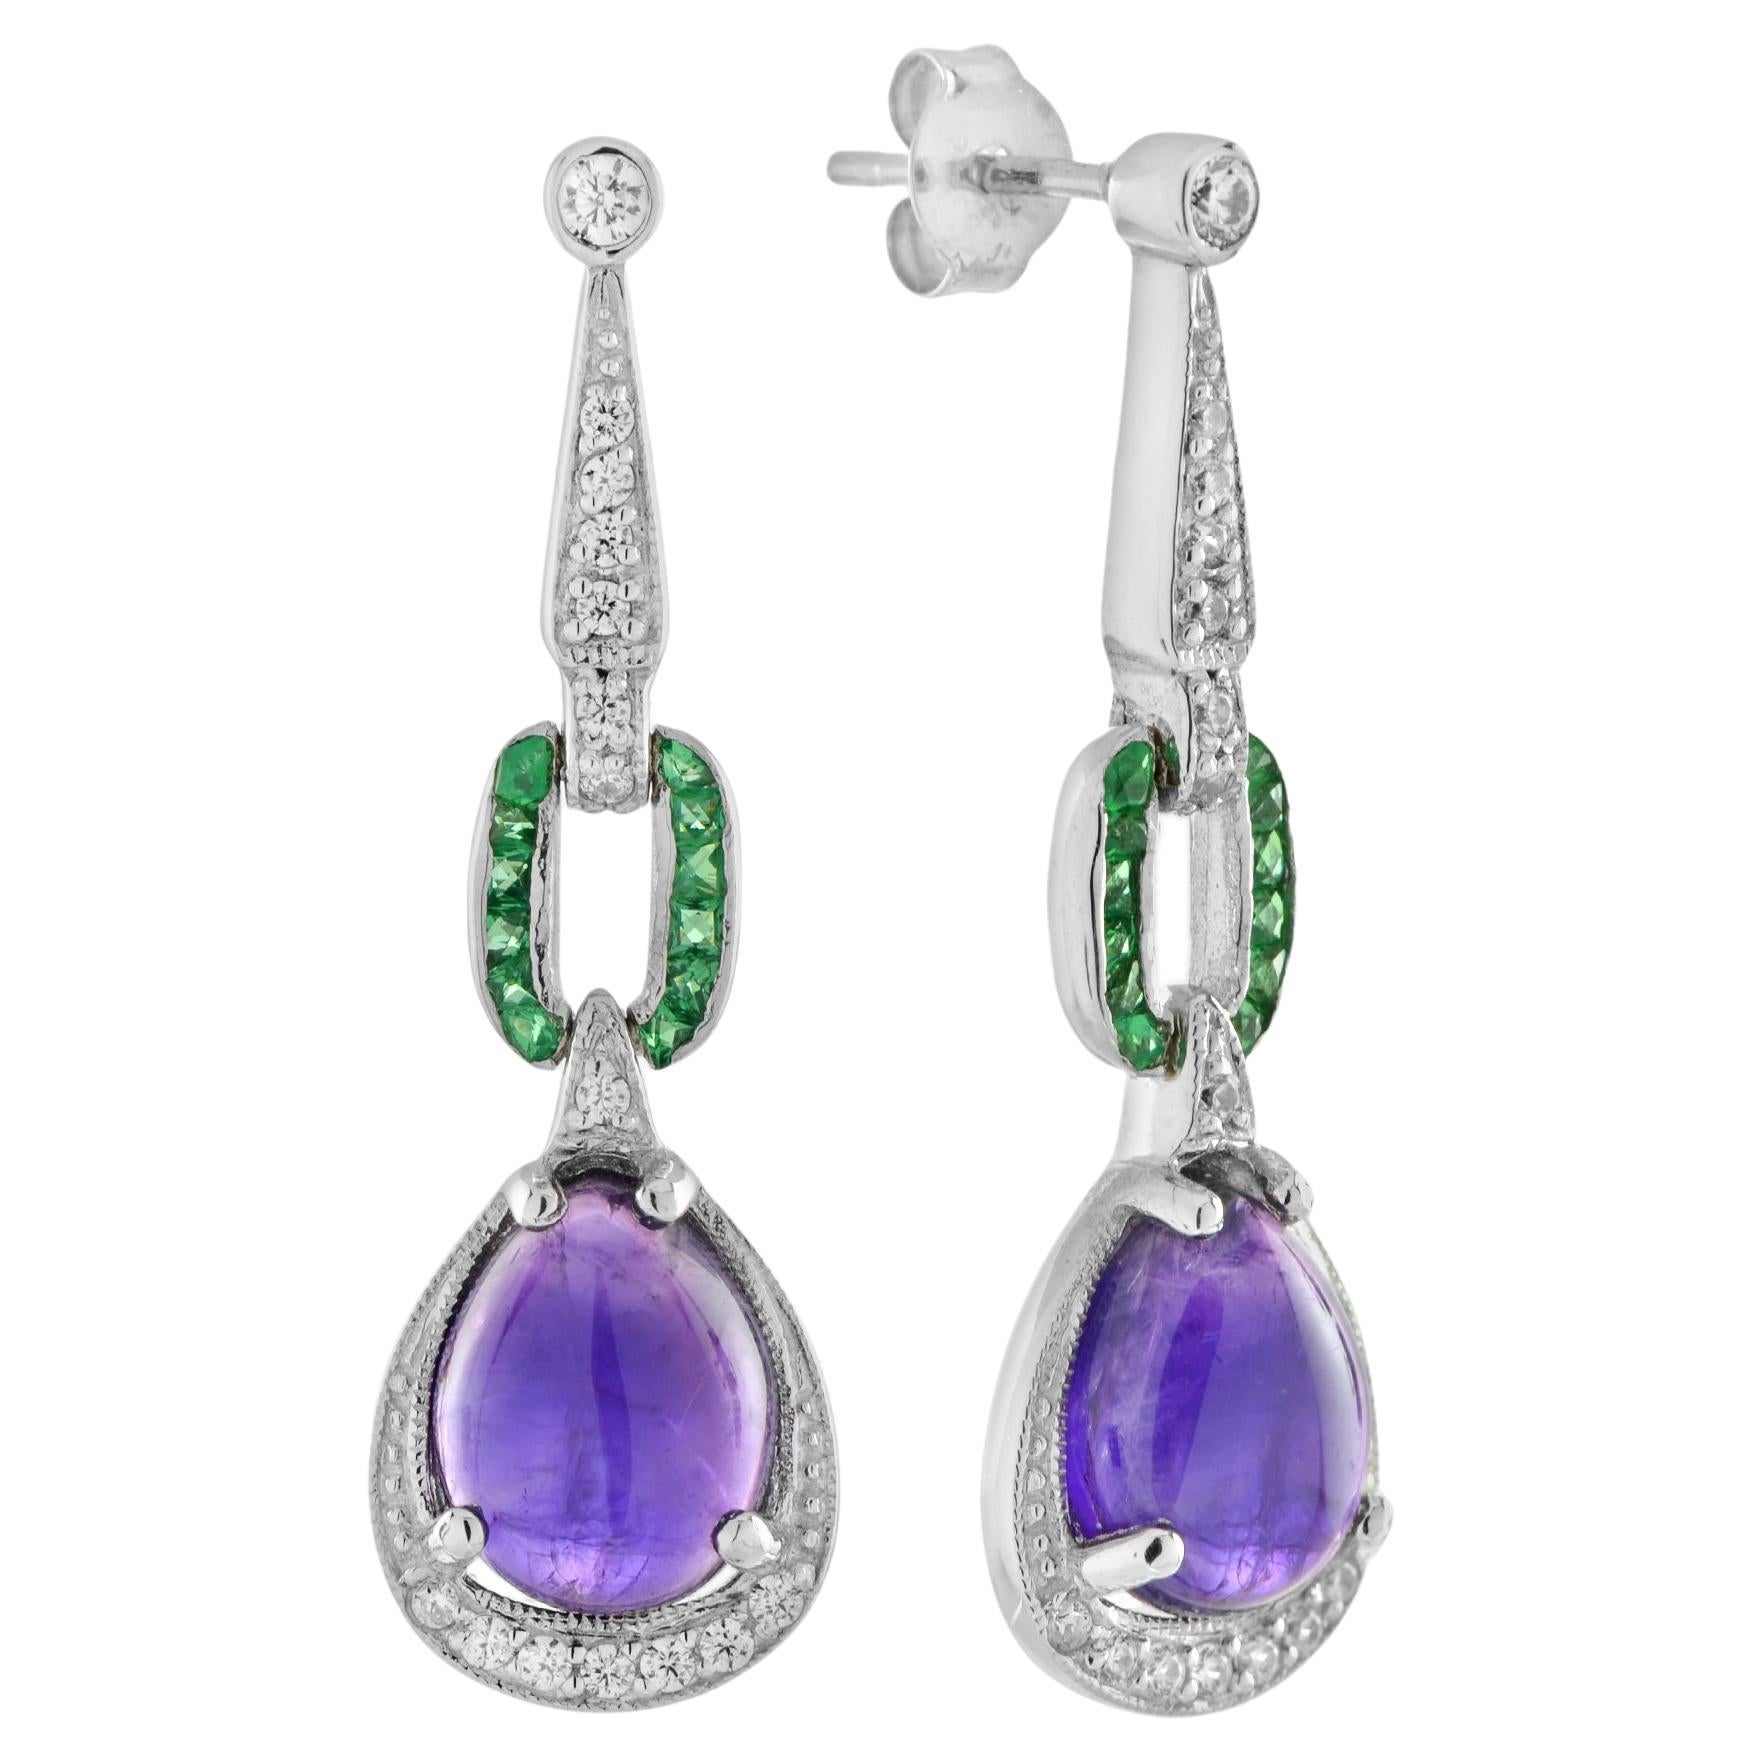 Cabochon Amethyst with Diamond and Emerald Dangle Earrings in 14k White Gold